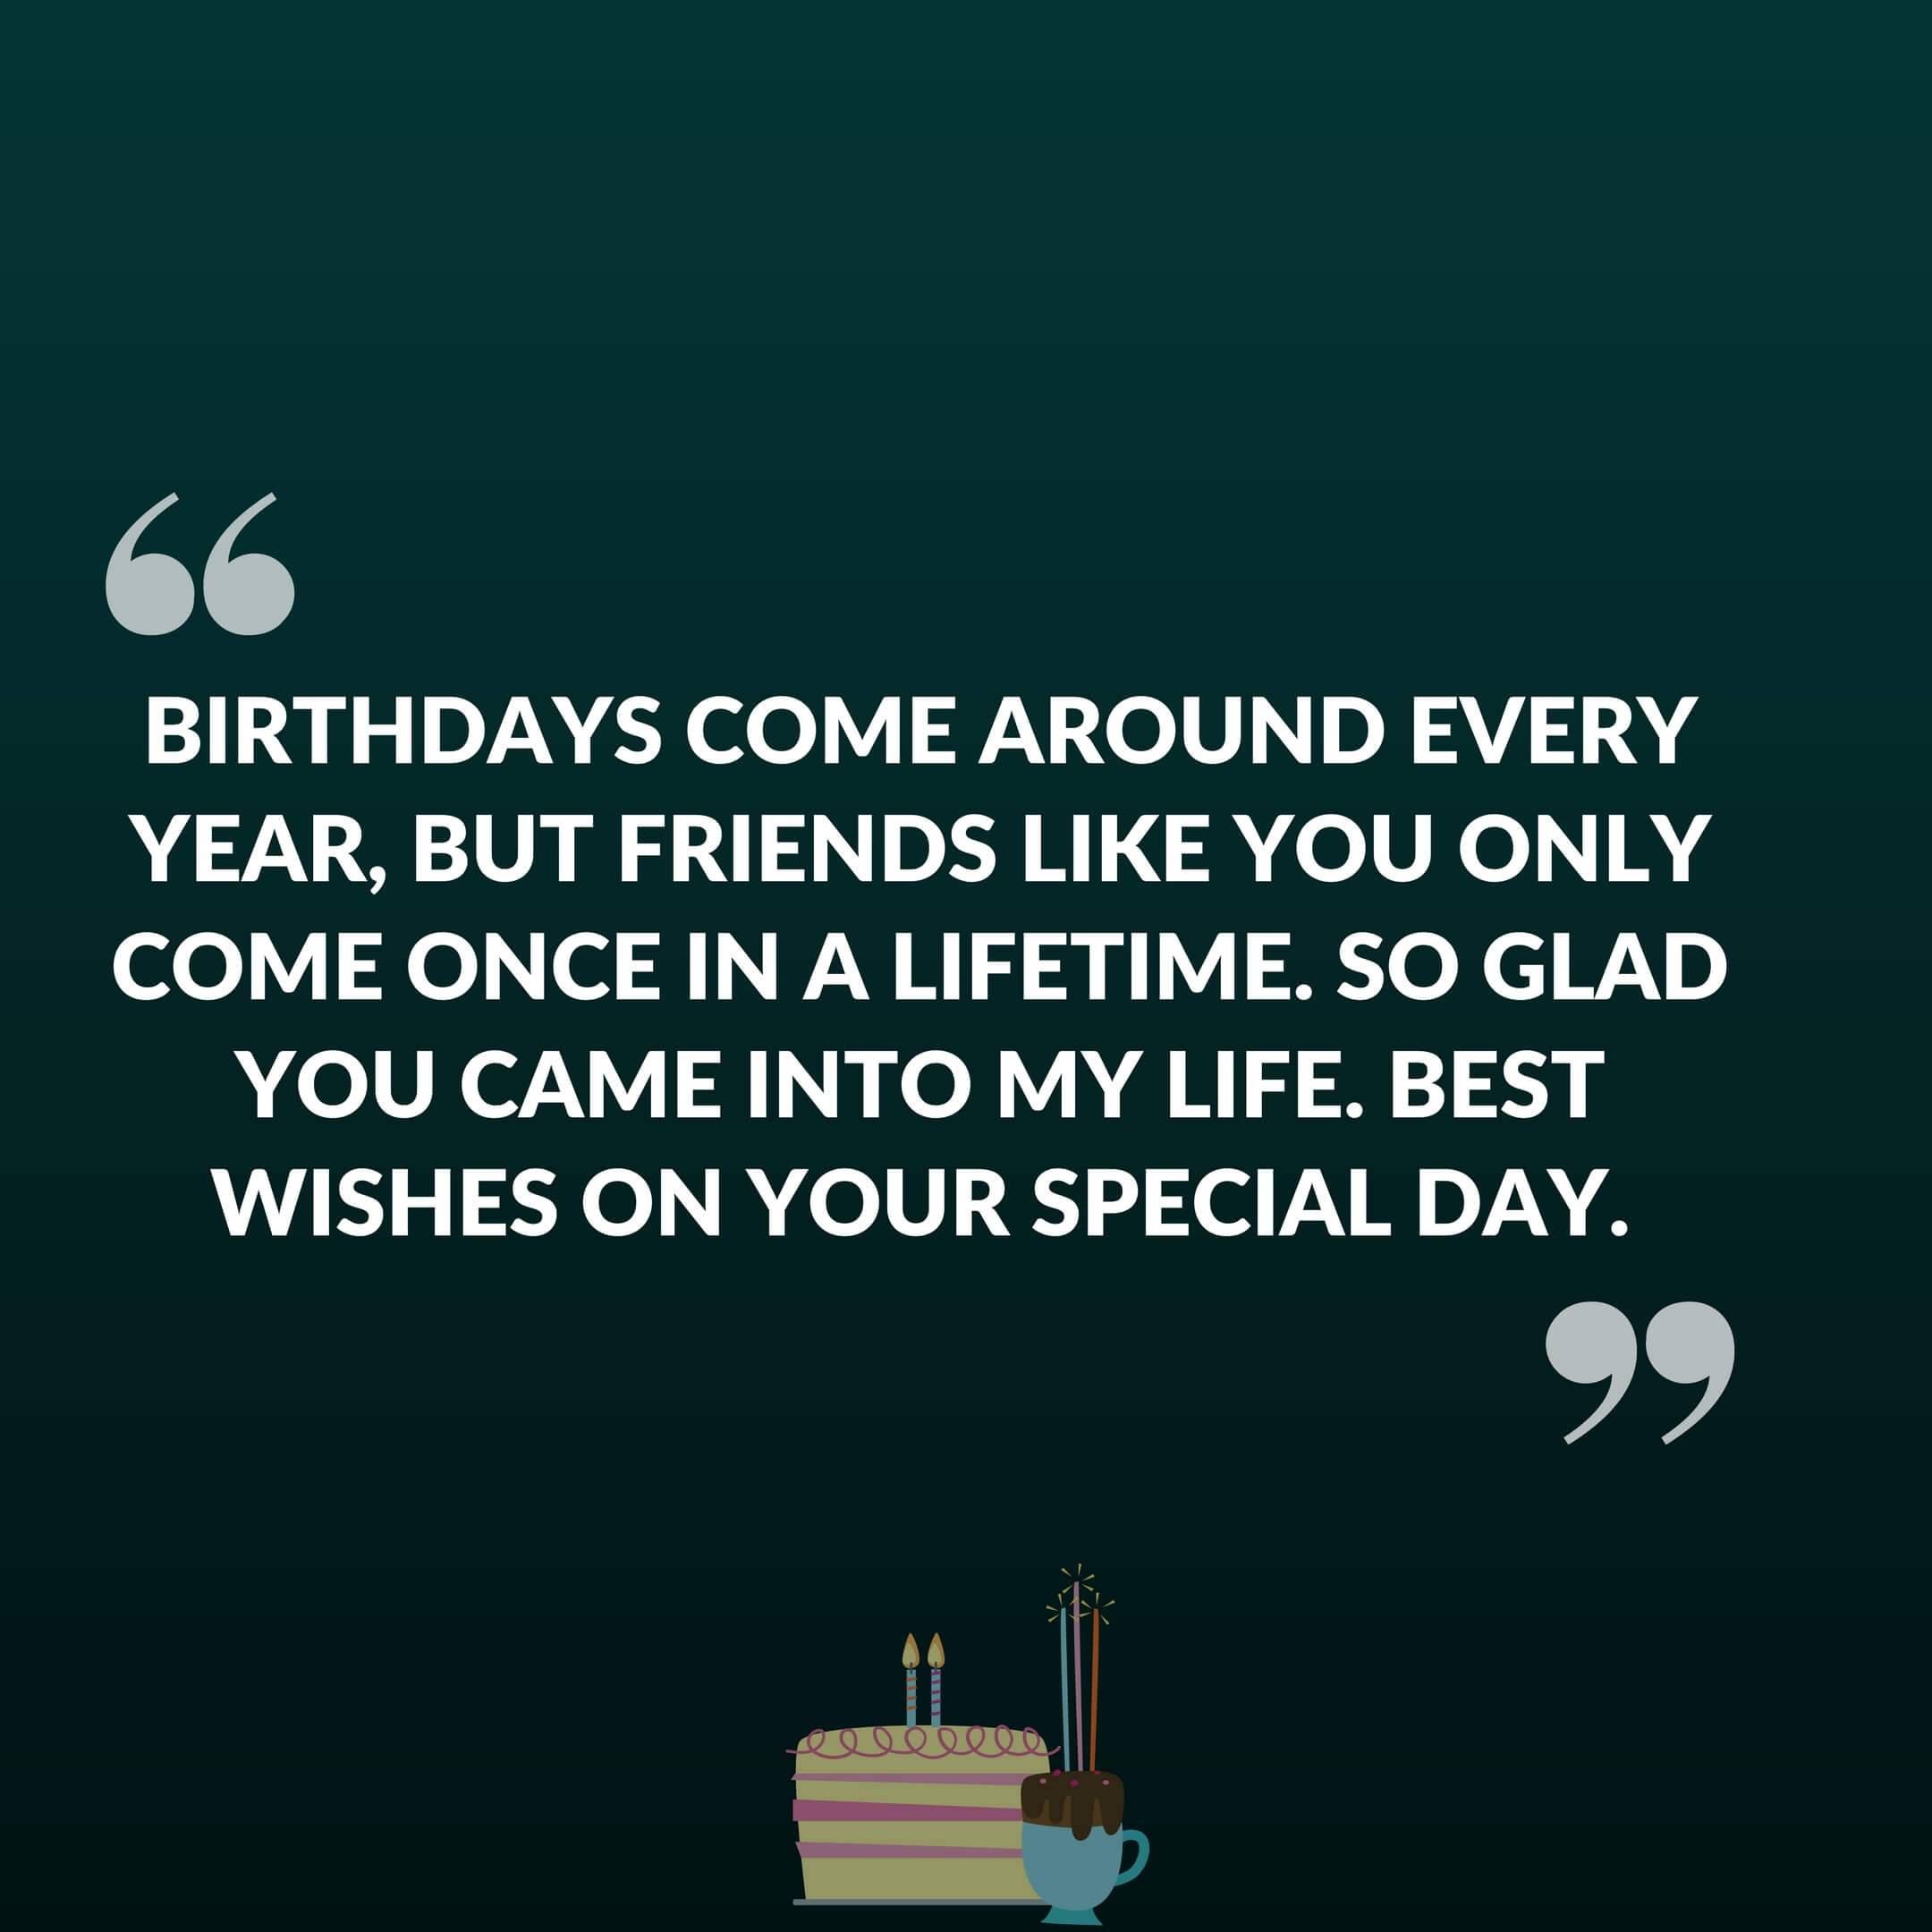 Birthdays come around every year, but friends like you only come once in a lifetime. So glad you came into my life. Best wishes on your special day.